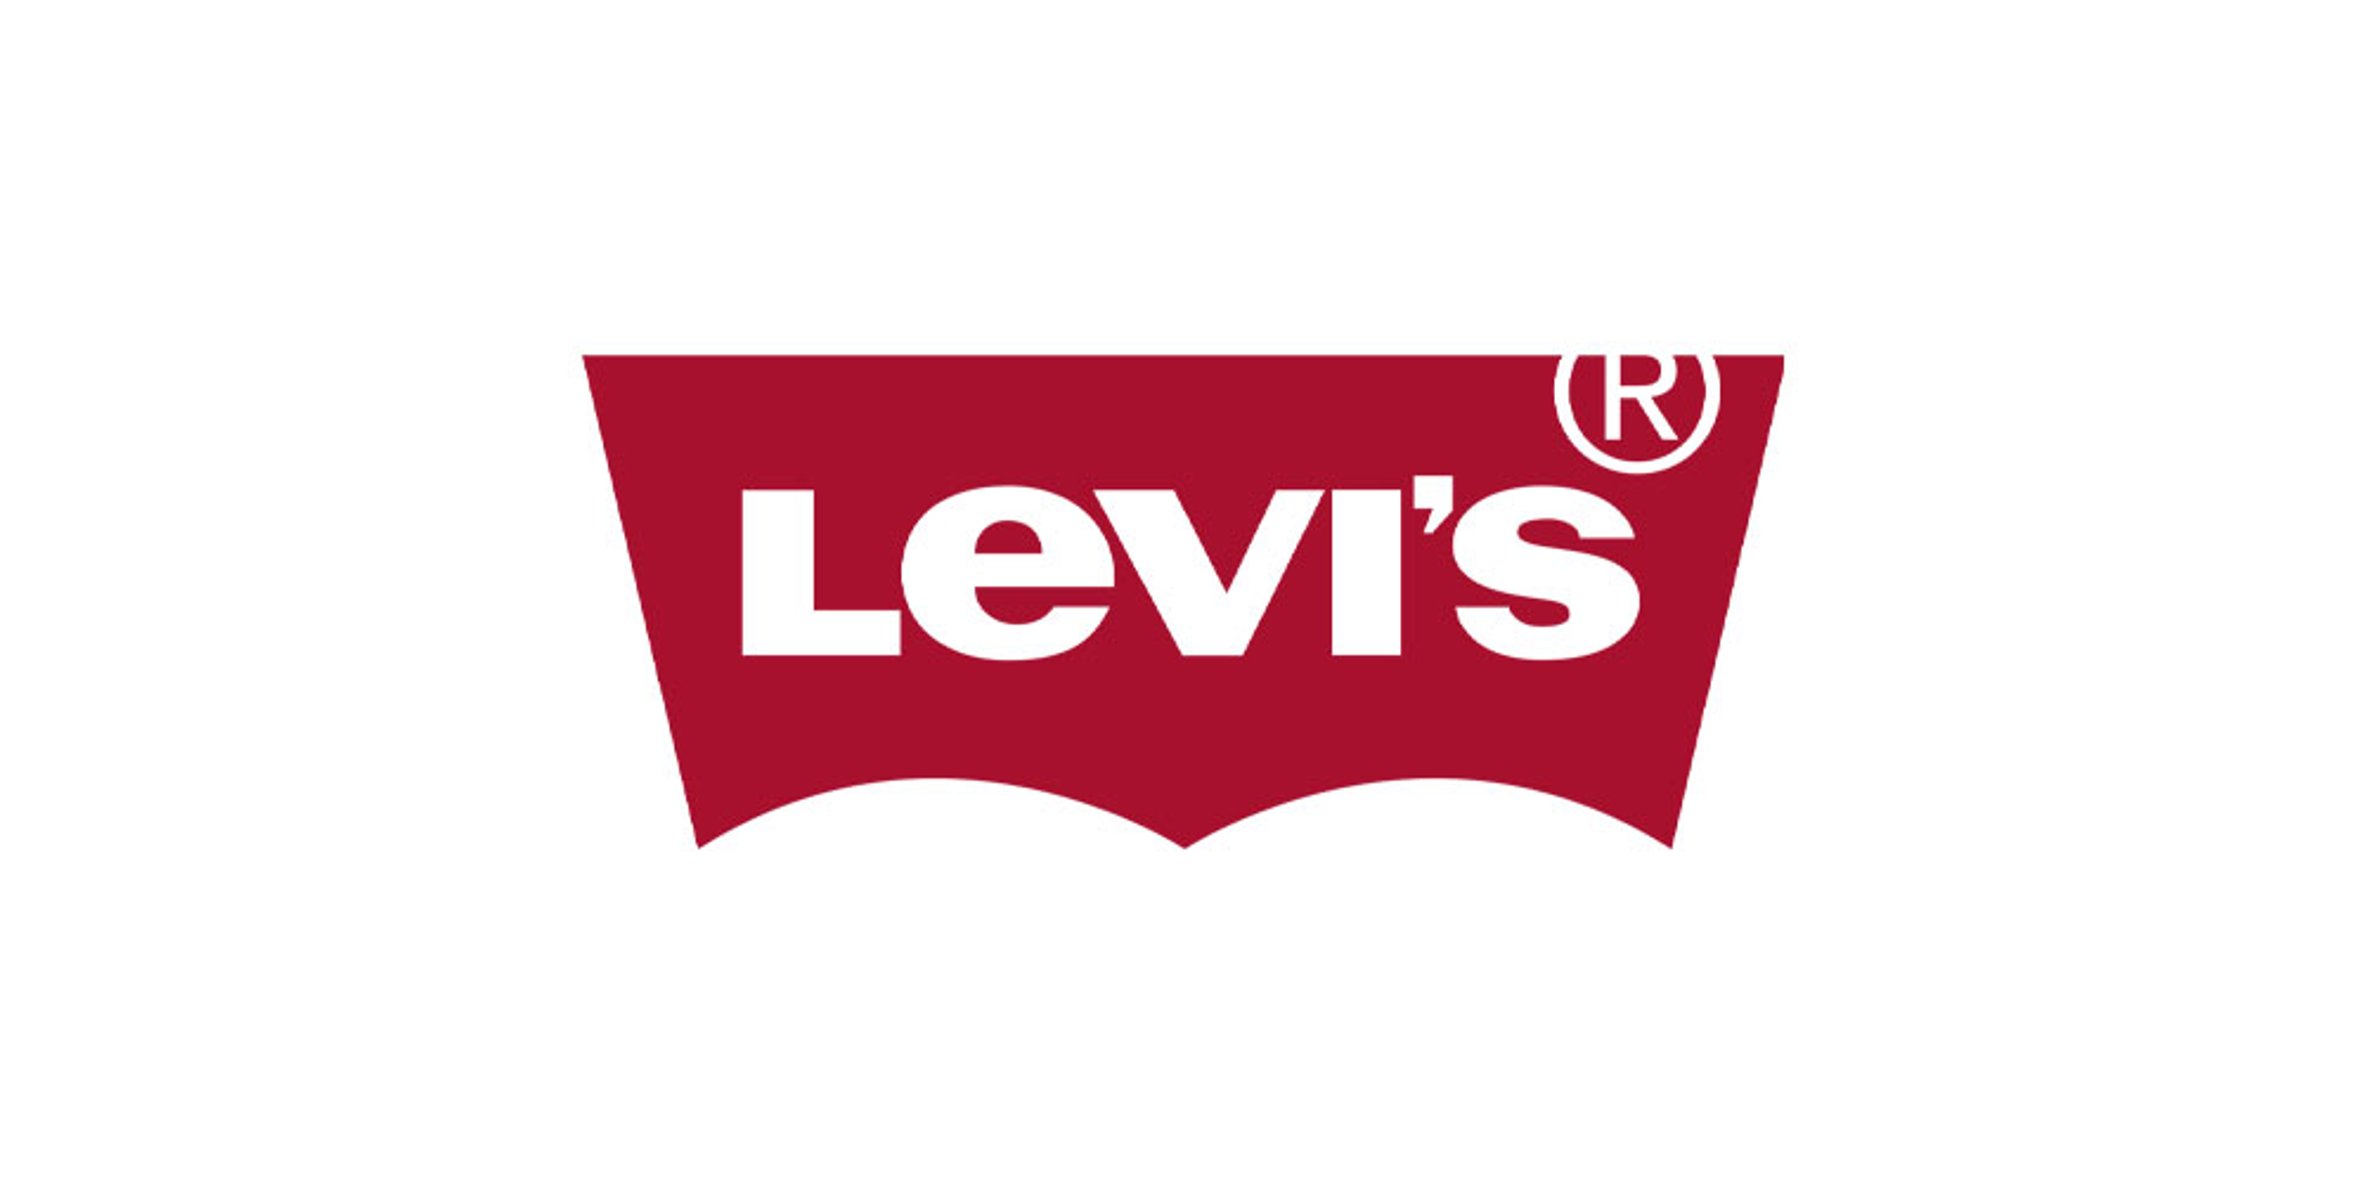 Levi's Vintage Clothing Photoshoot Seeking Models Job List Casting Talent,  Actors Wanted, Acting Work, Acting Auditions | Casting Talent